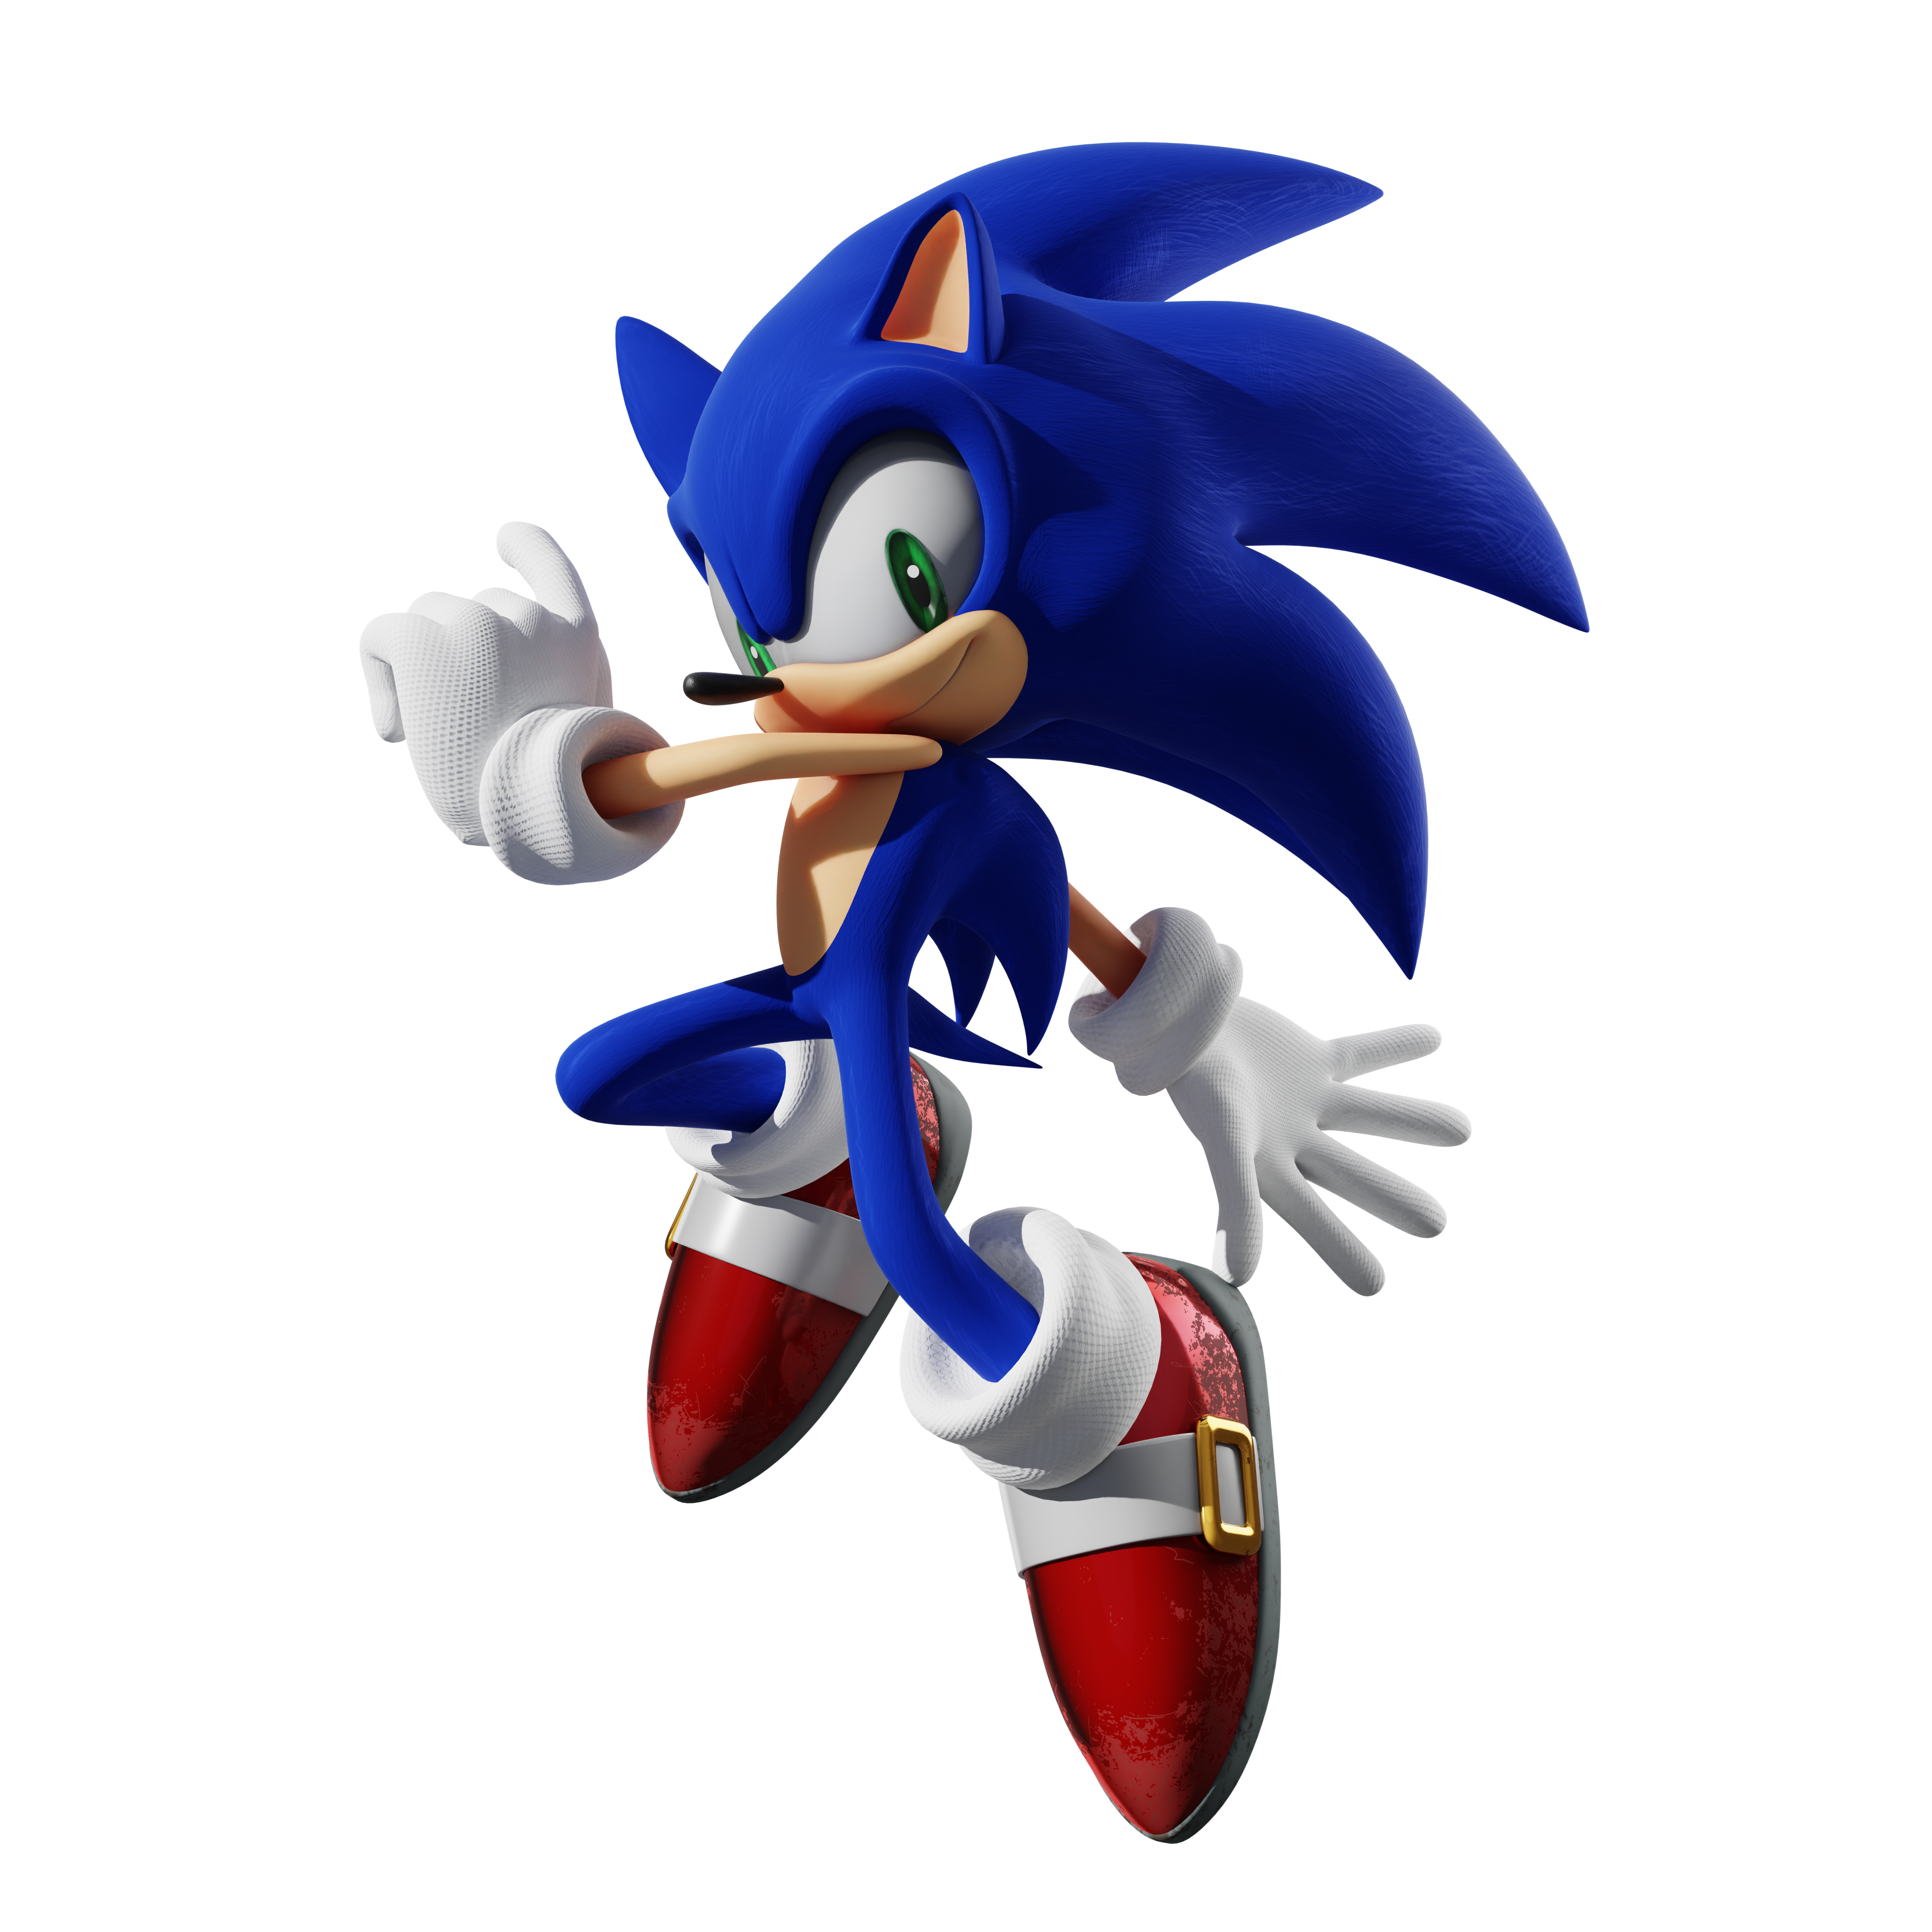 File:Sonic-Generations-transparent-bg.png - Wikimedia Commons